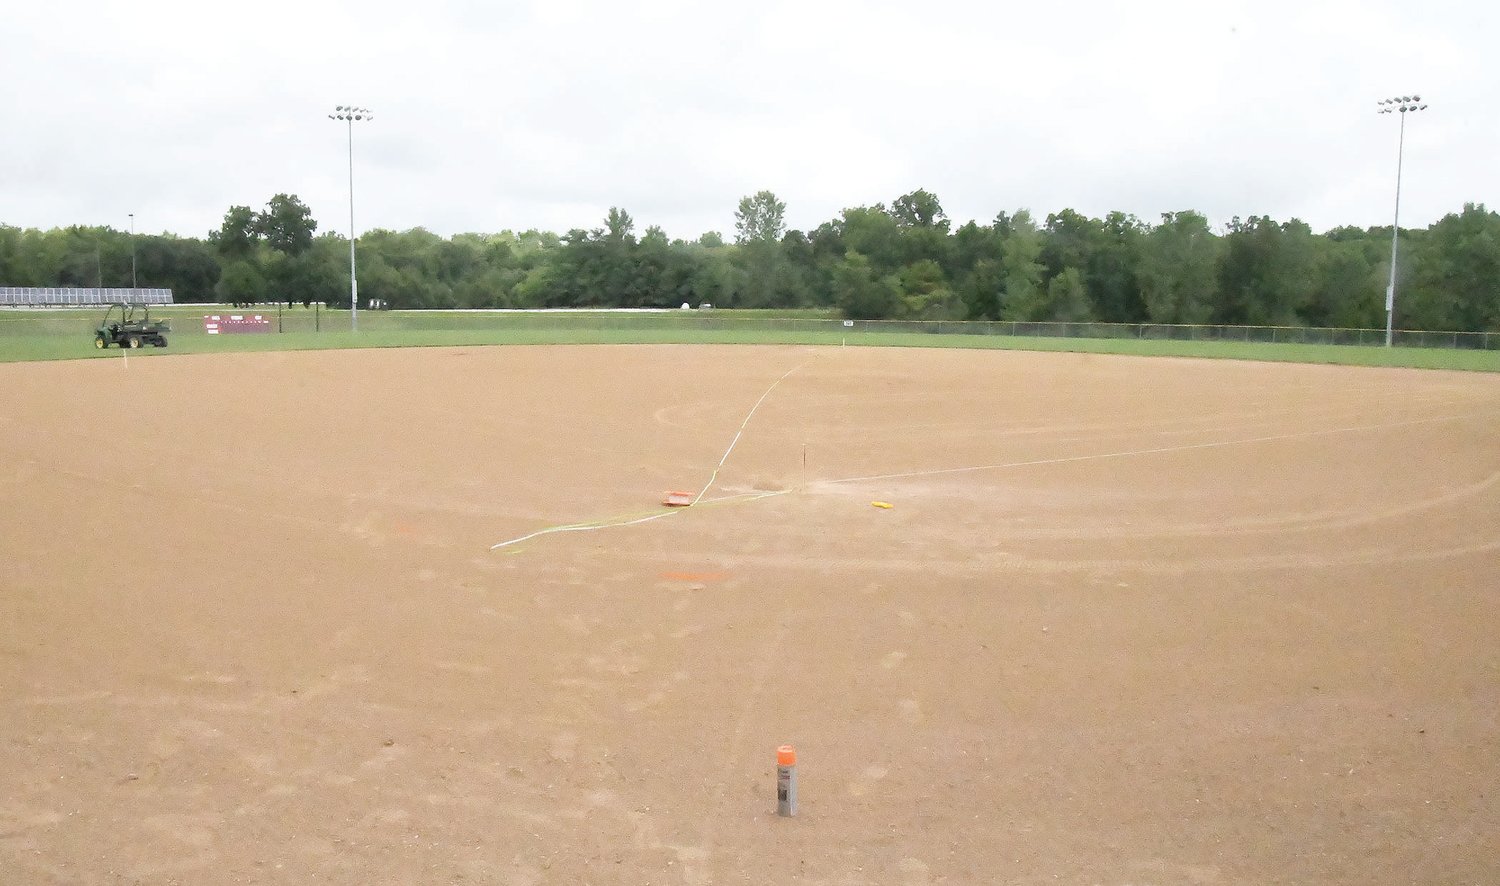 Work is underway on dirt and sod improvements to Howard Hils Athletic Complex’s Field Red No. 1. This will be the field used by the first-year Moberly Area Community College baseball program.